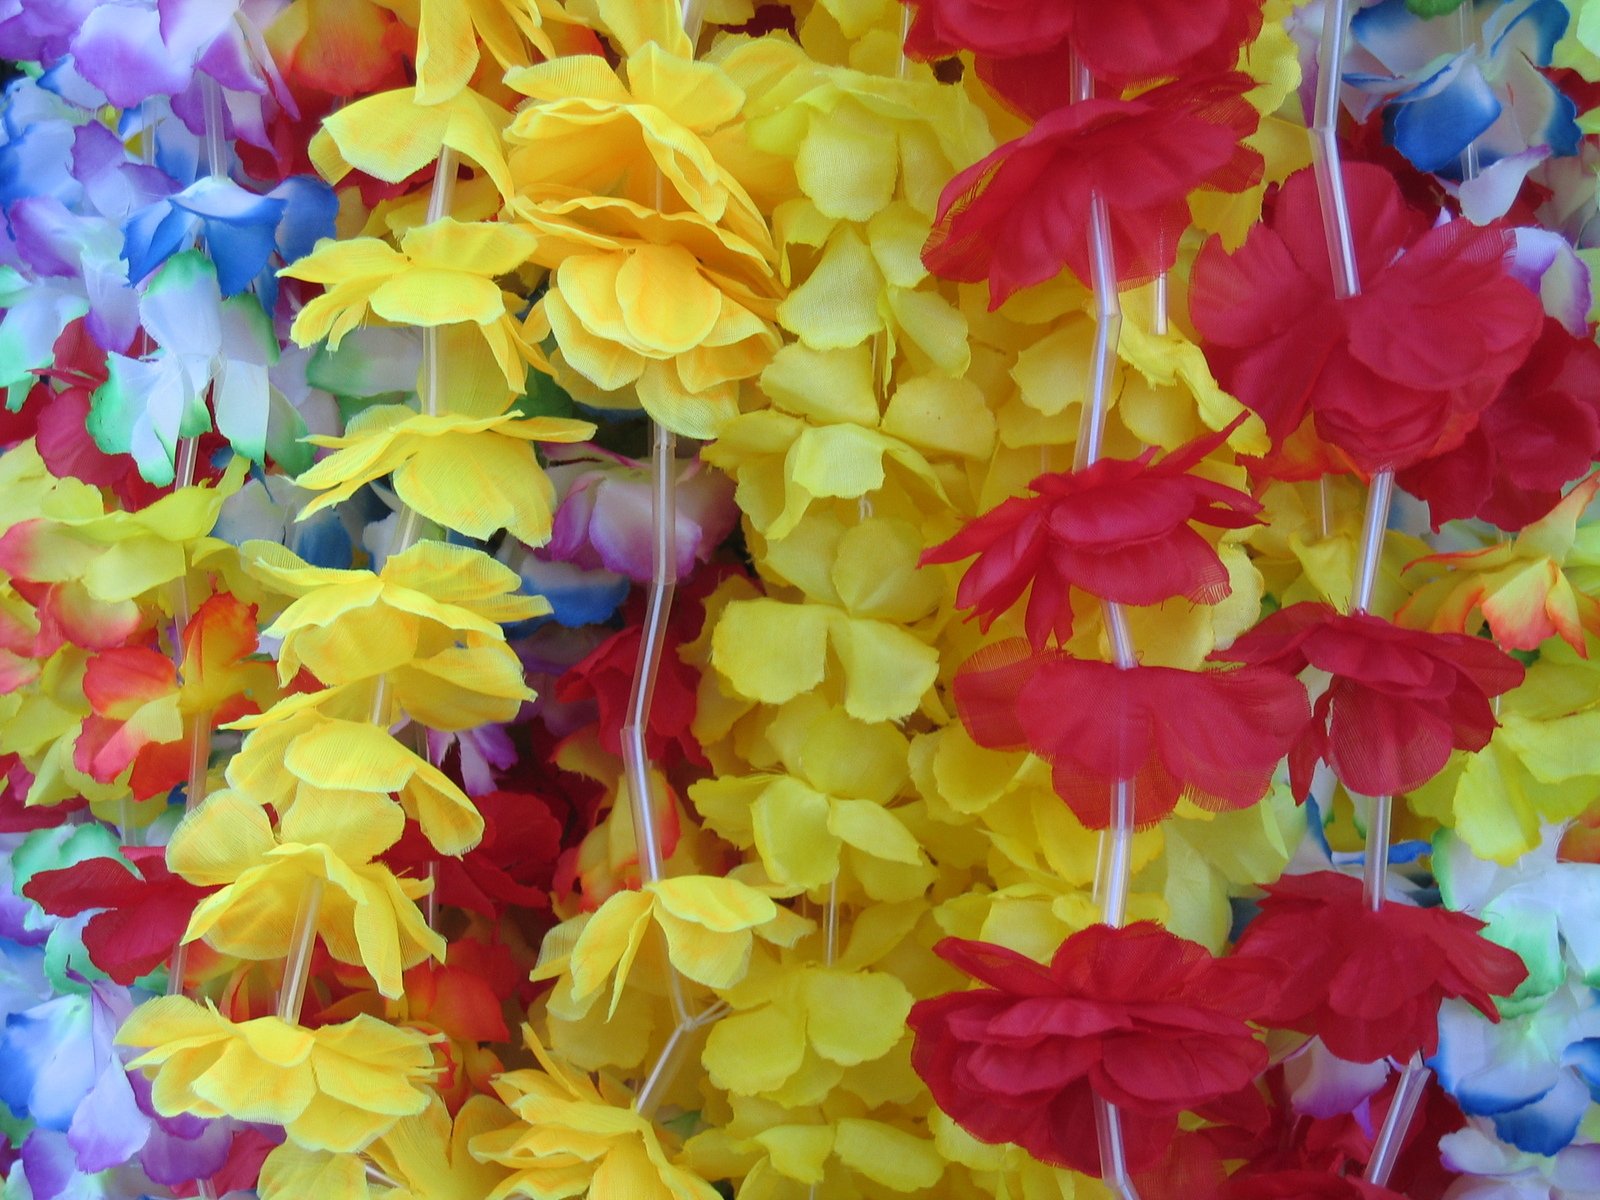 colorful hawaiian leis are hanging in the room